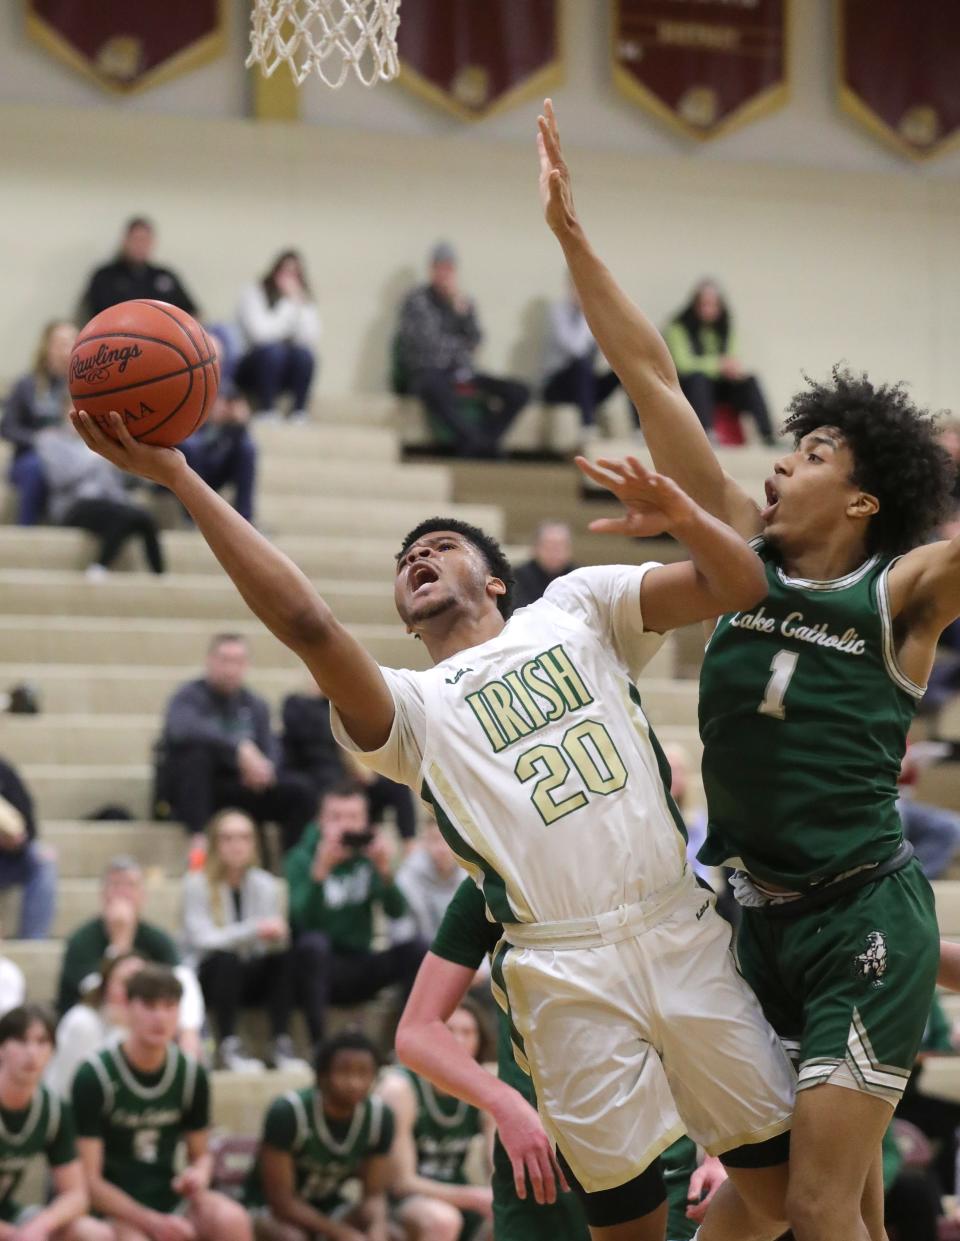 After winning it's second consecutive Division II state basketball championship last season, St. Vincent-St. Mary will compete in Division I in boys basketball for the 2022-23 season.